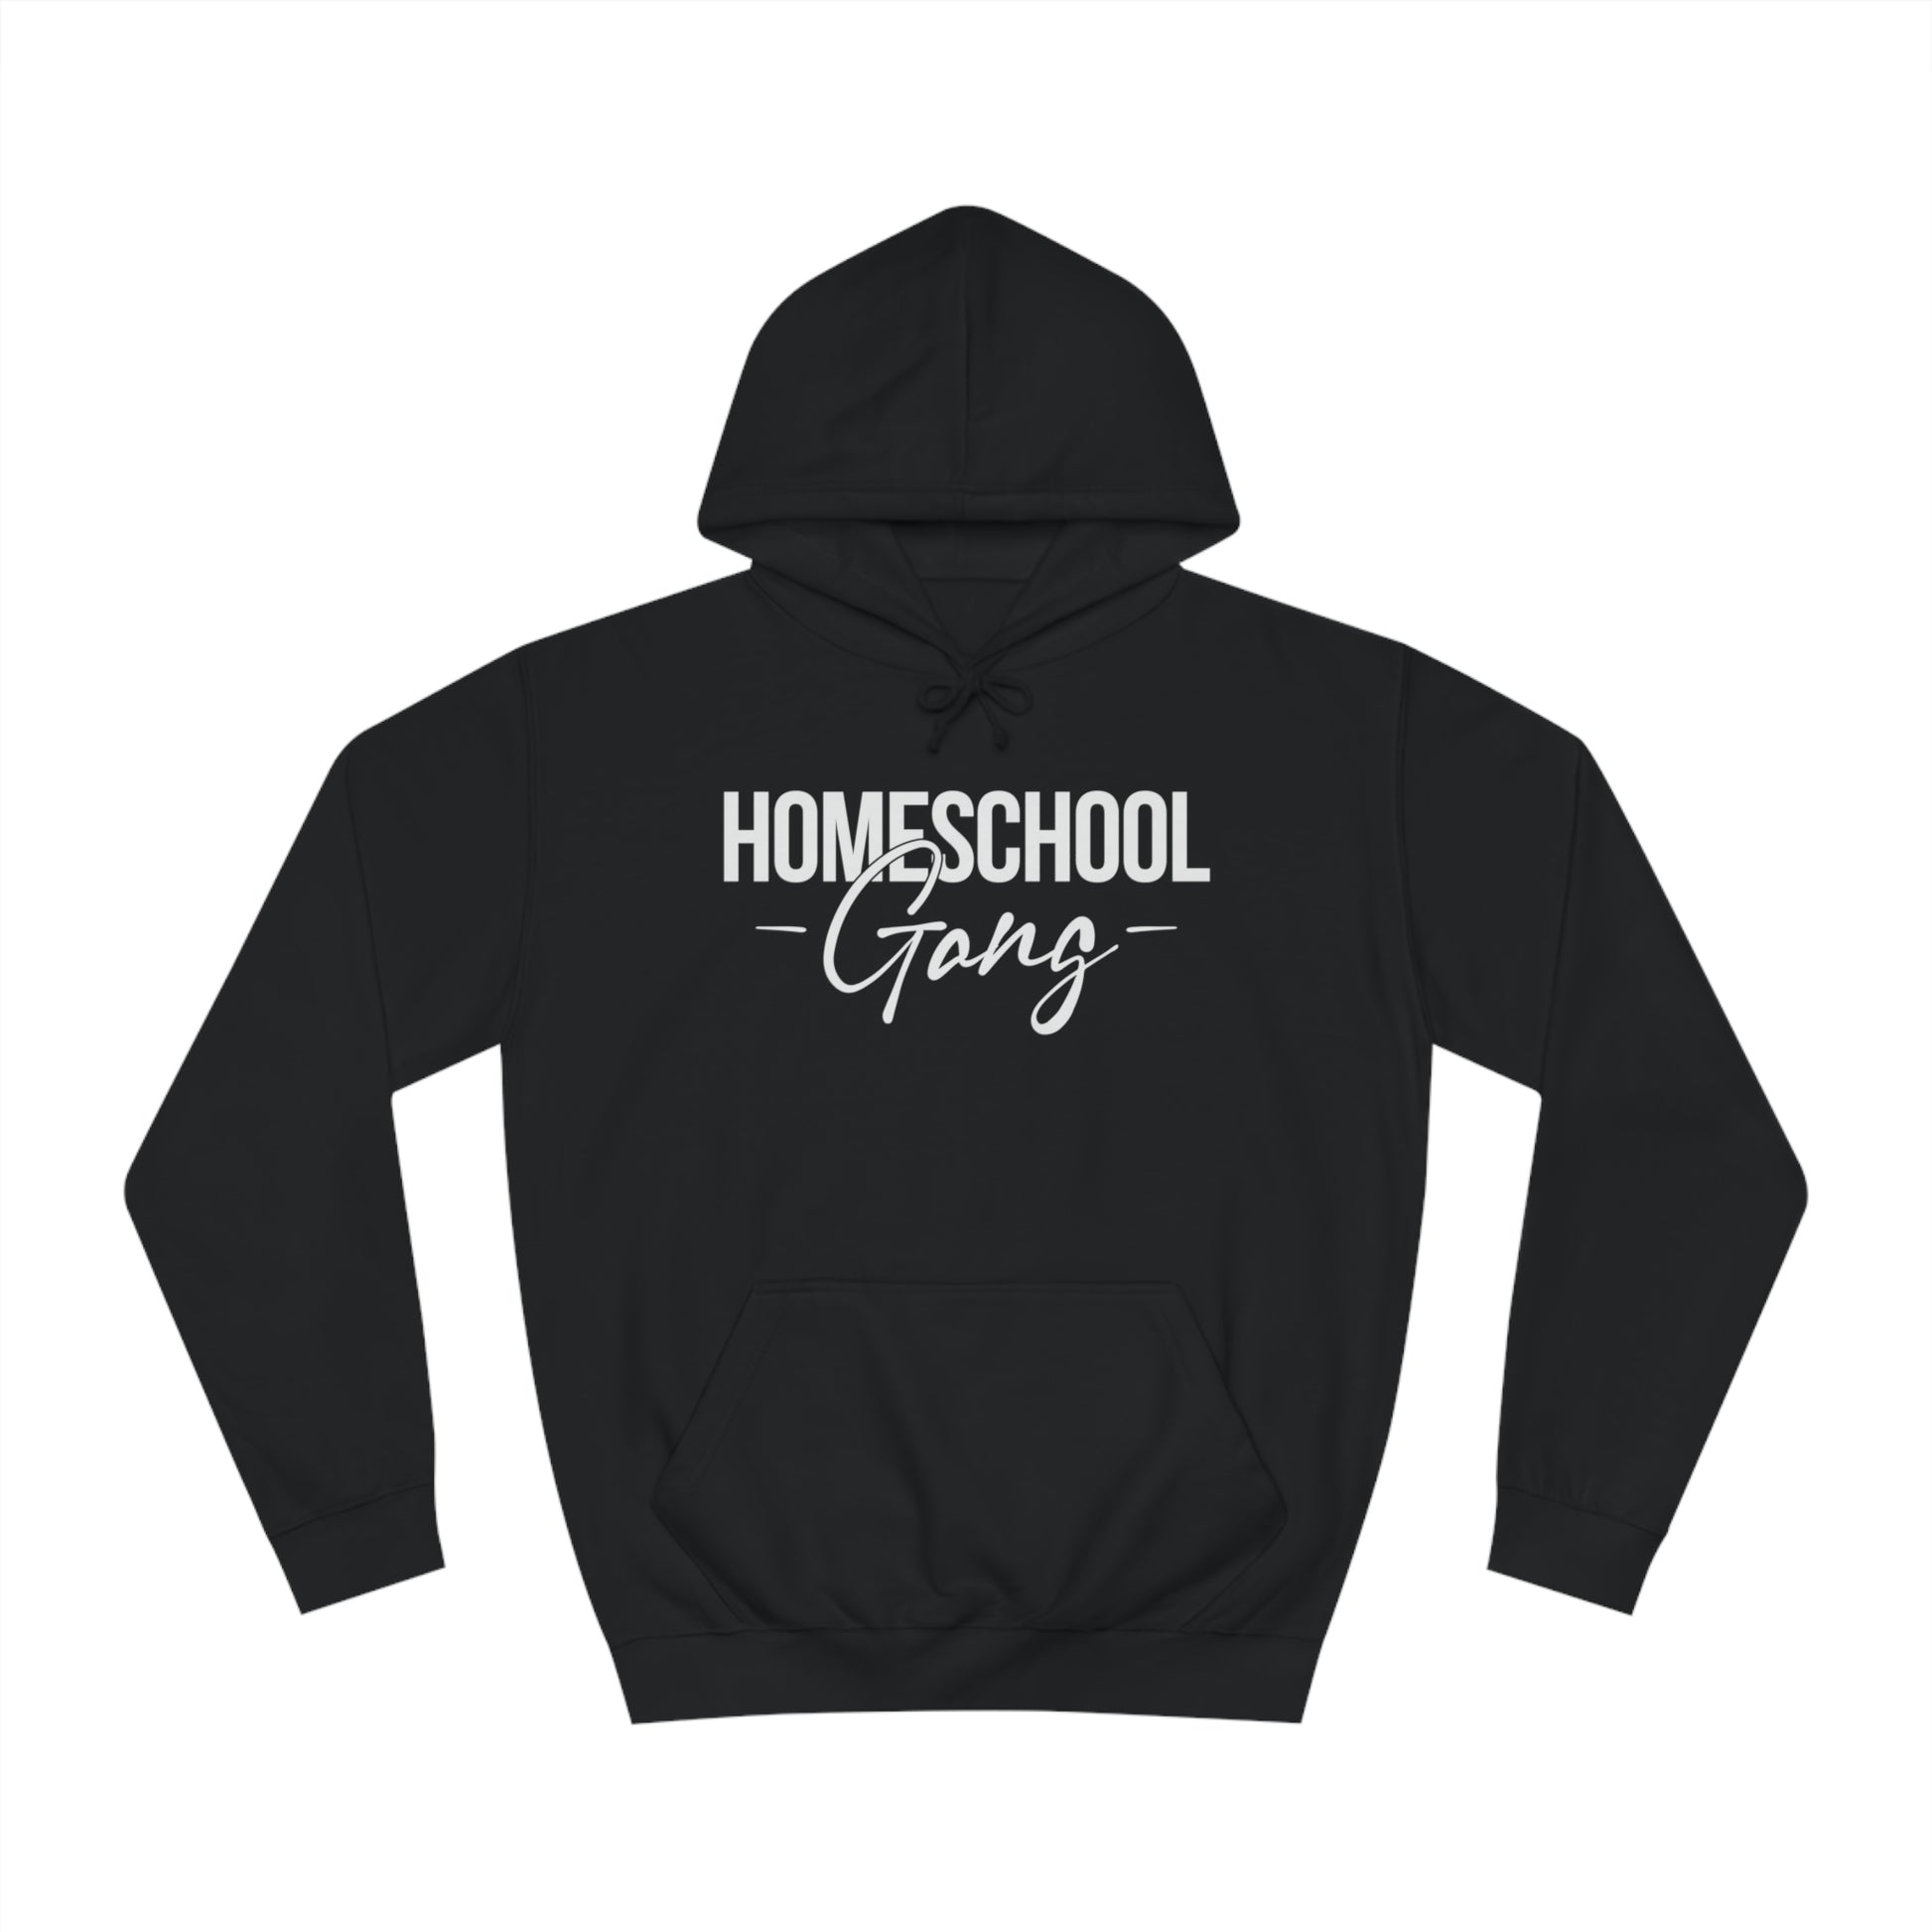 Images likely display the hoodie being worn by individuals or laid out to showcase the “Homeschool Gang” logo and the overall design.